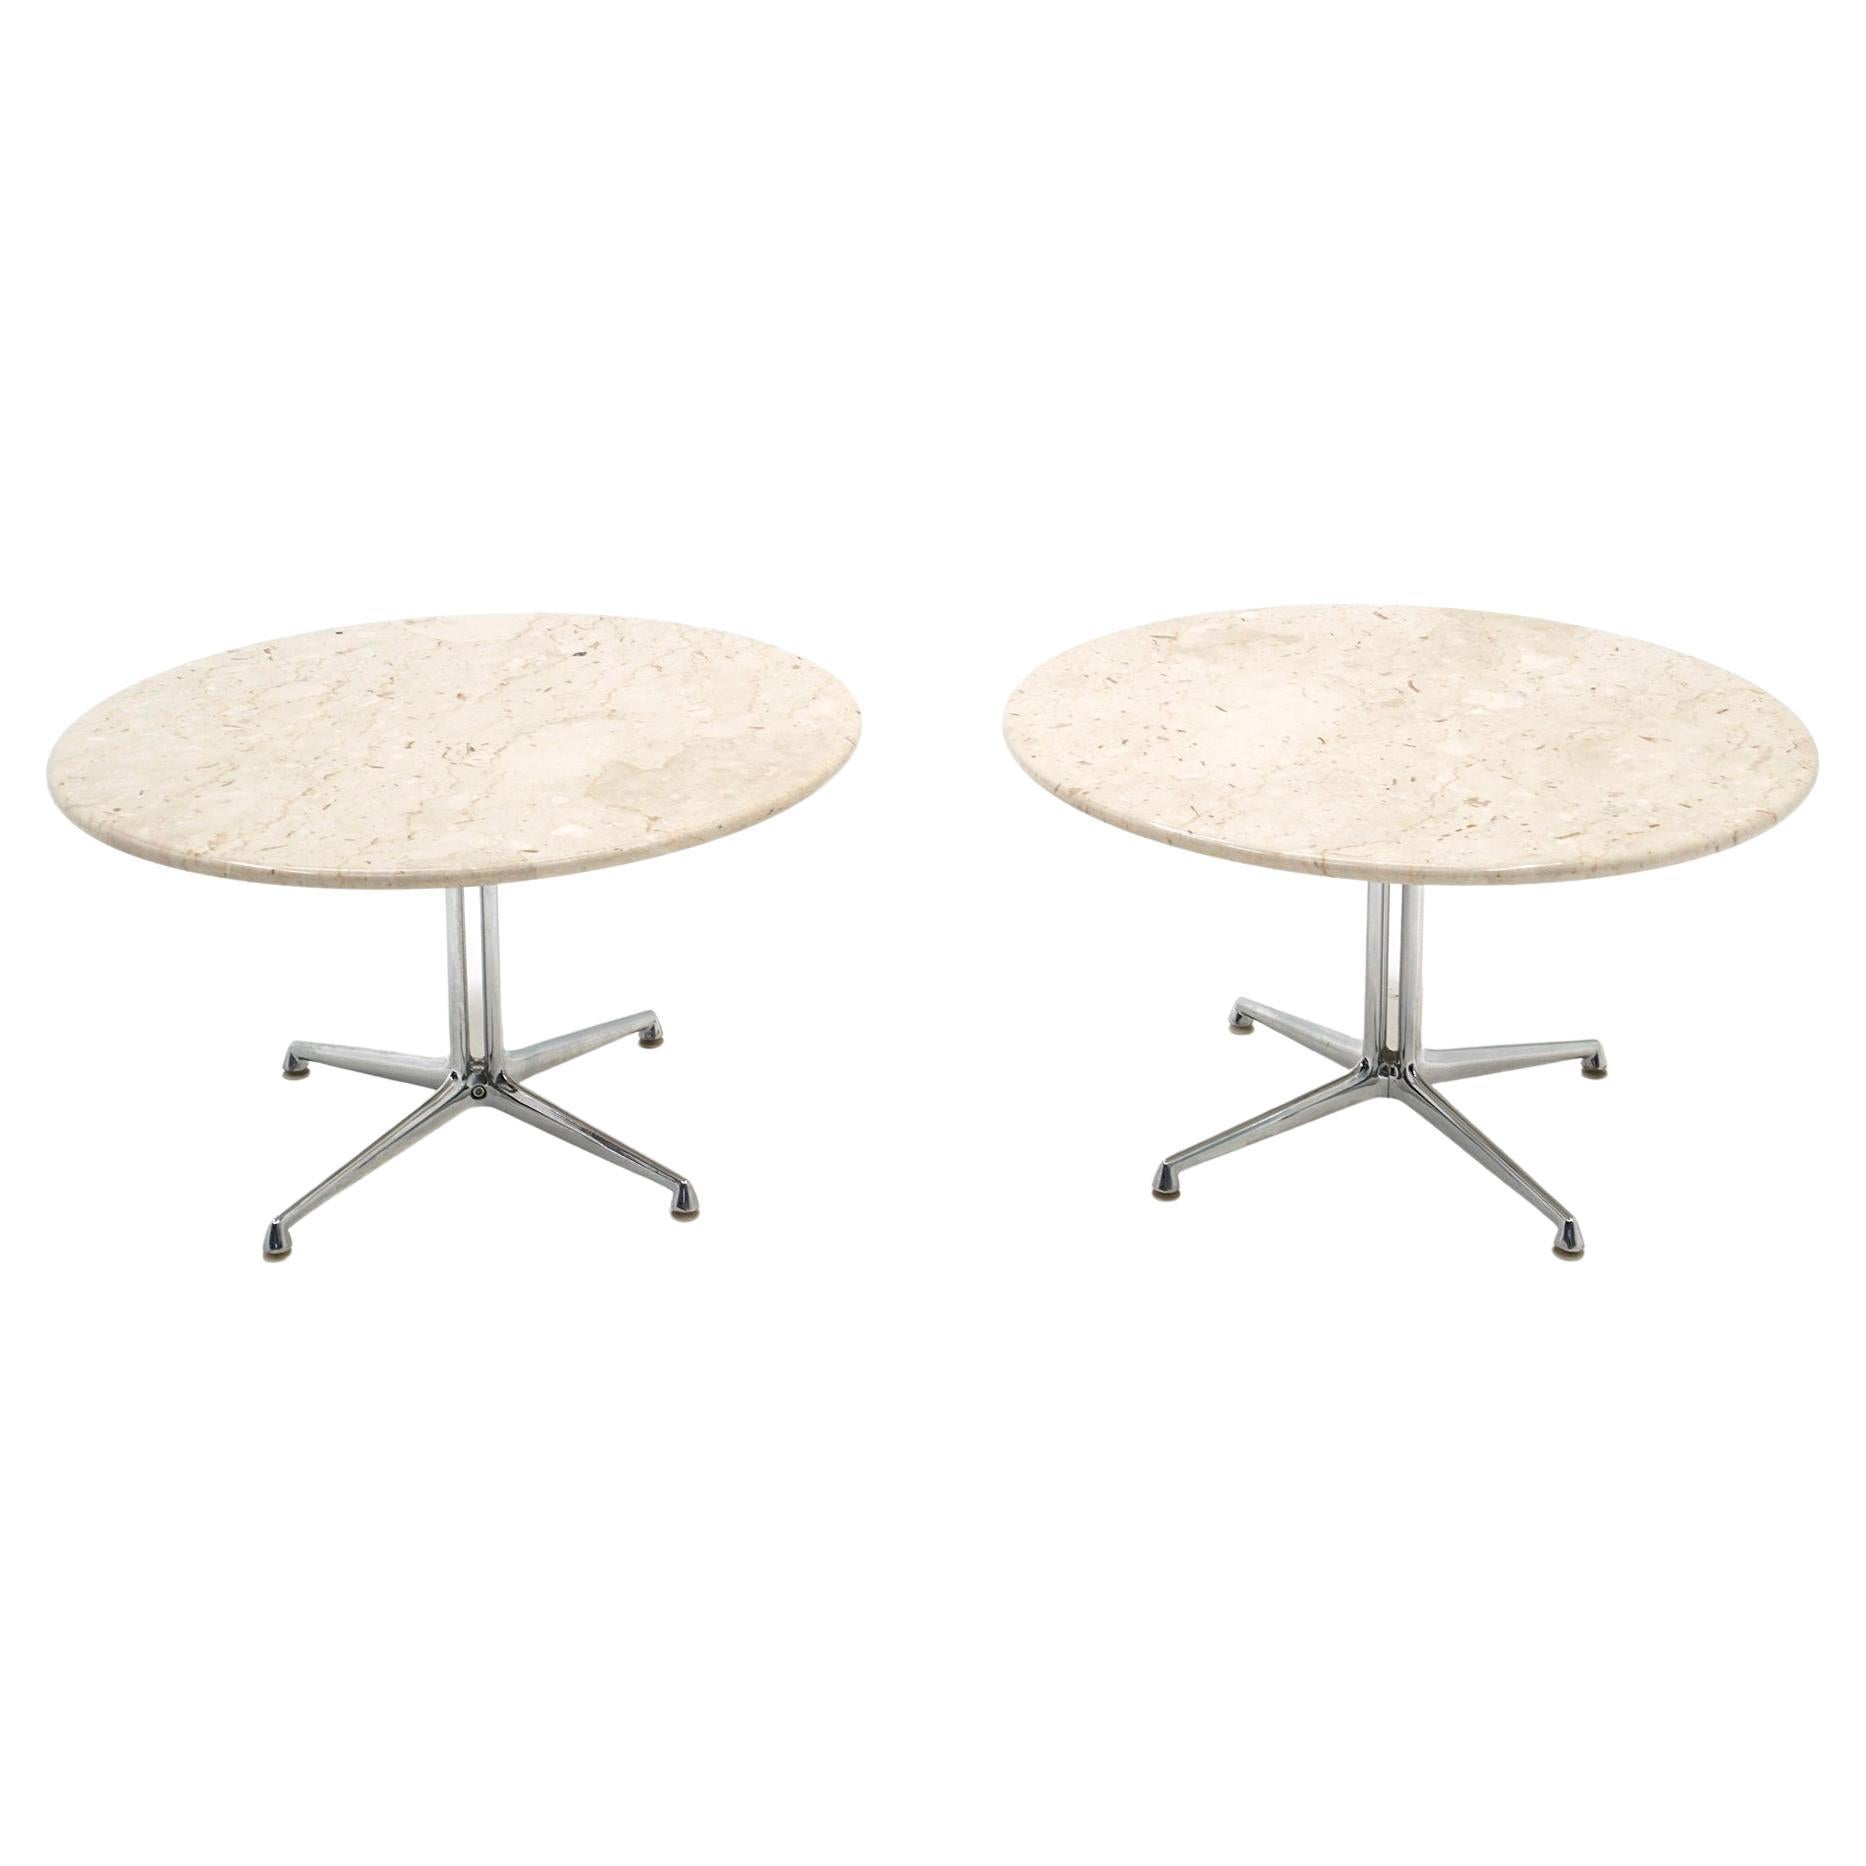 Pair La Fonda Tables by Charles & Ray Eames, Travertine, Chrome, Signed For Sale